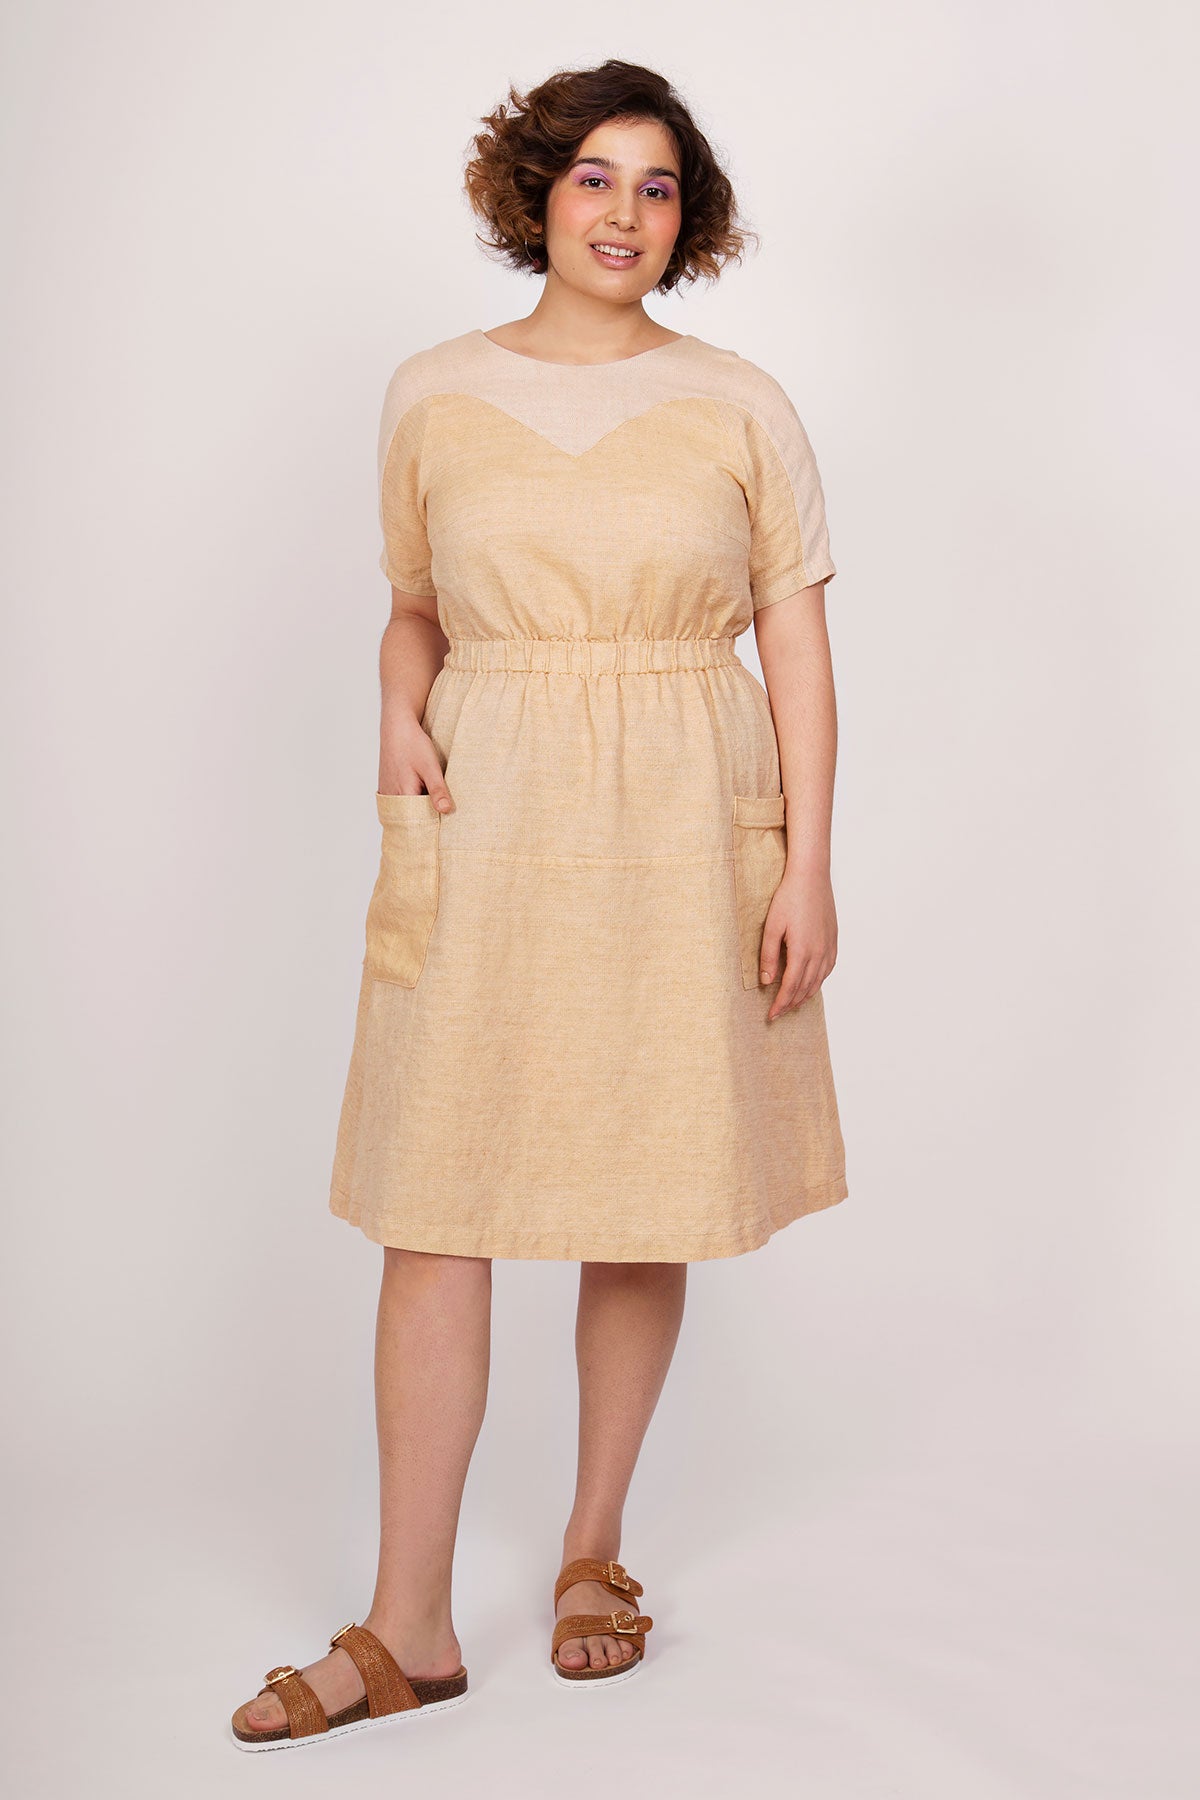 Woman wearing the Valo Dress sewing pattern from Named on The Fold Line. A dress pattern made in non-stretch, medium weight fabrics such as linen fabrics, featuring an elasticated waist, large patch pockets, relaxed-fit, heart-shaped yoke with a scoop nec